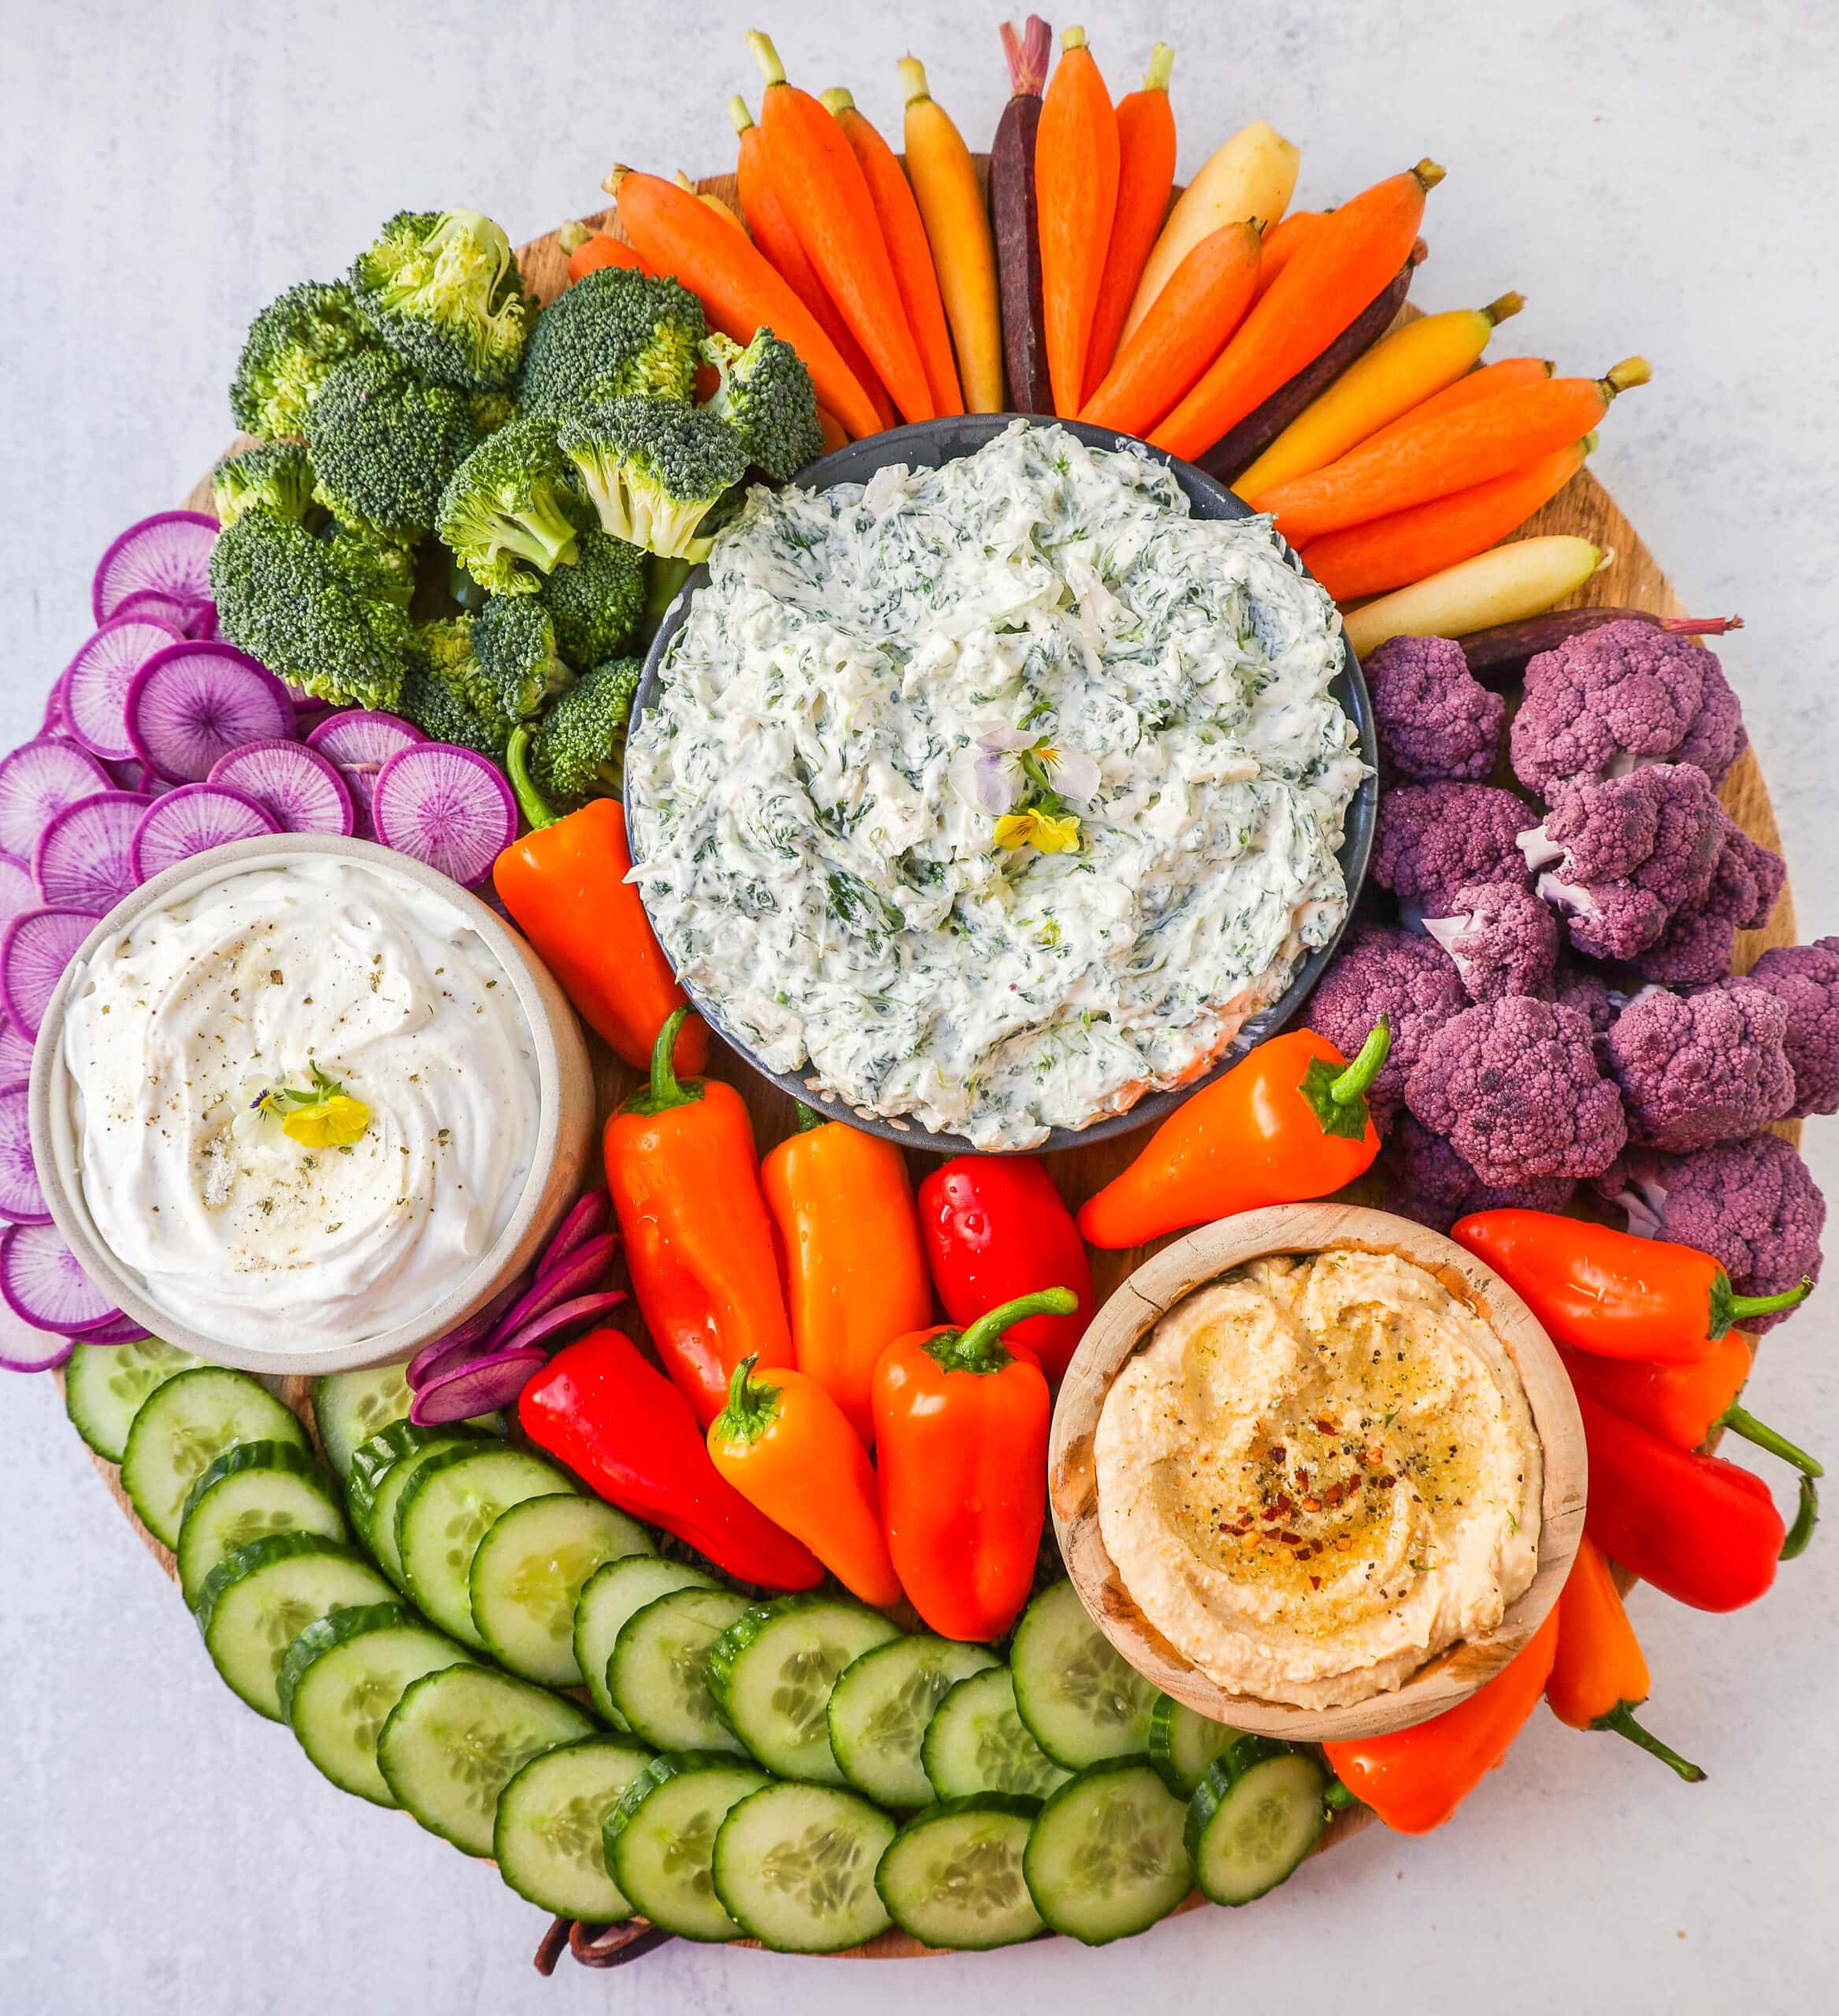 How to make a beautiful Crudite Platter with vegetables and dips. I am sharing my favorite veggie dip recipes, what vegetables to put on a veggie tray, and how to arrange one. It is so easy to make a stunning vegetable platter!